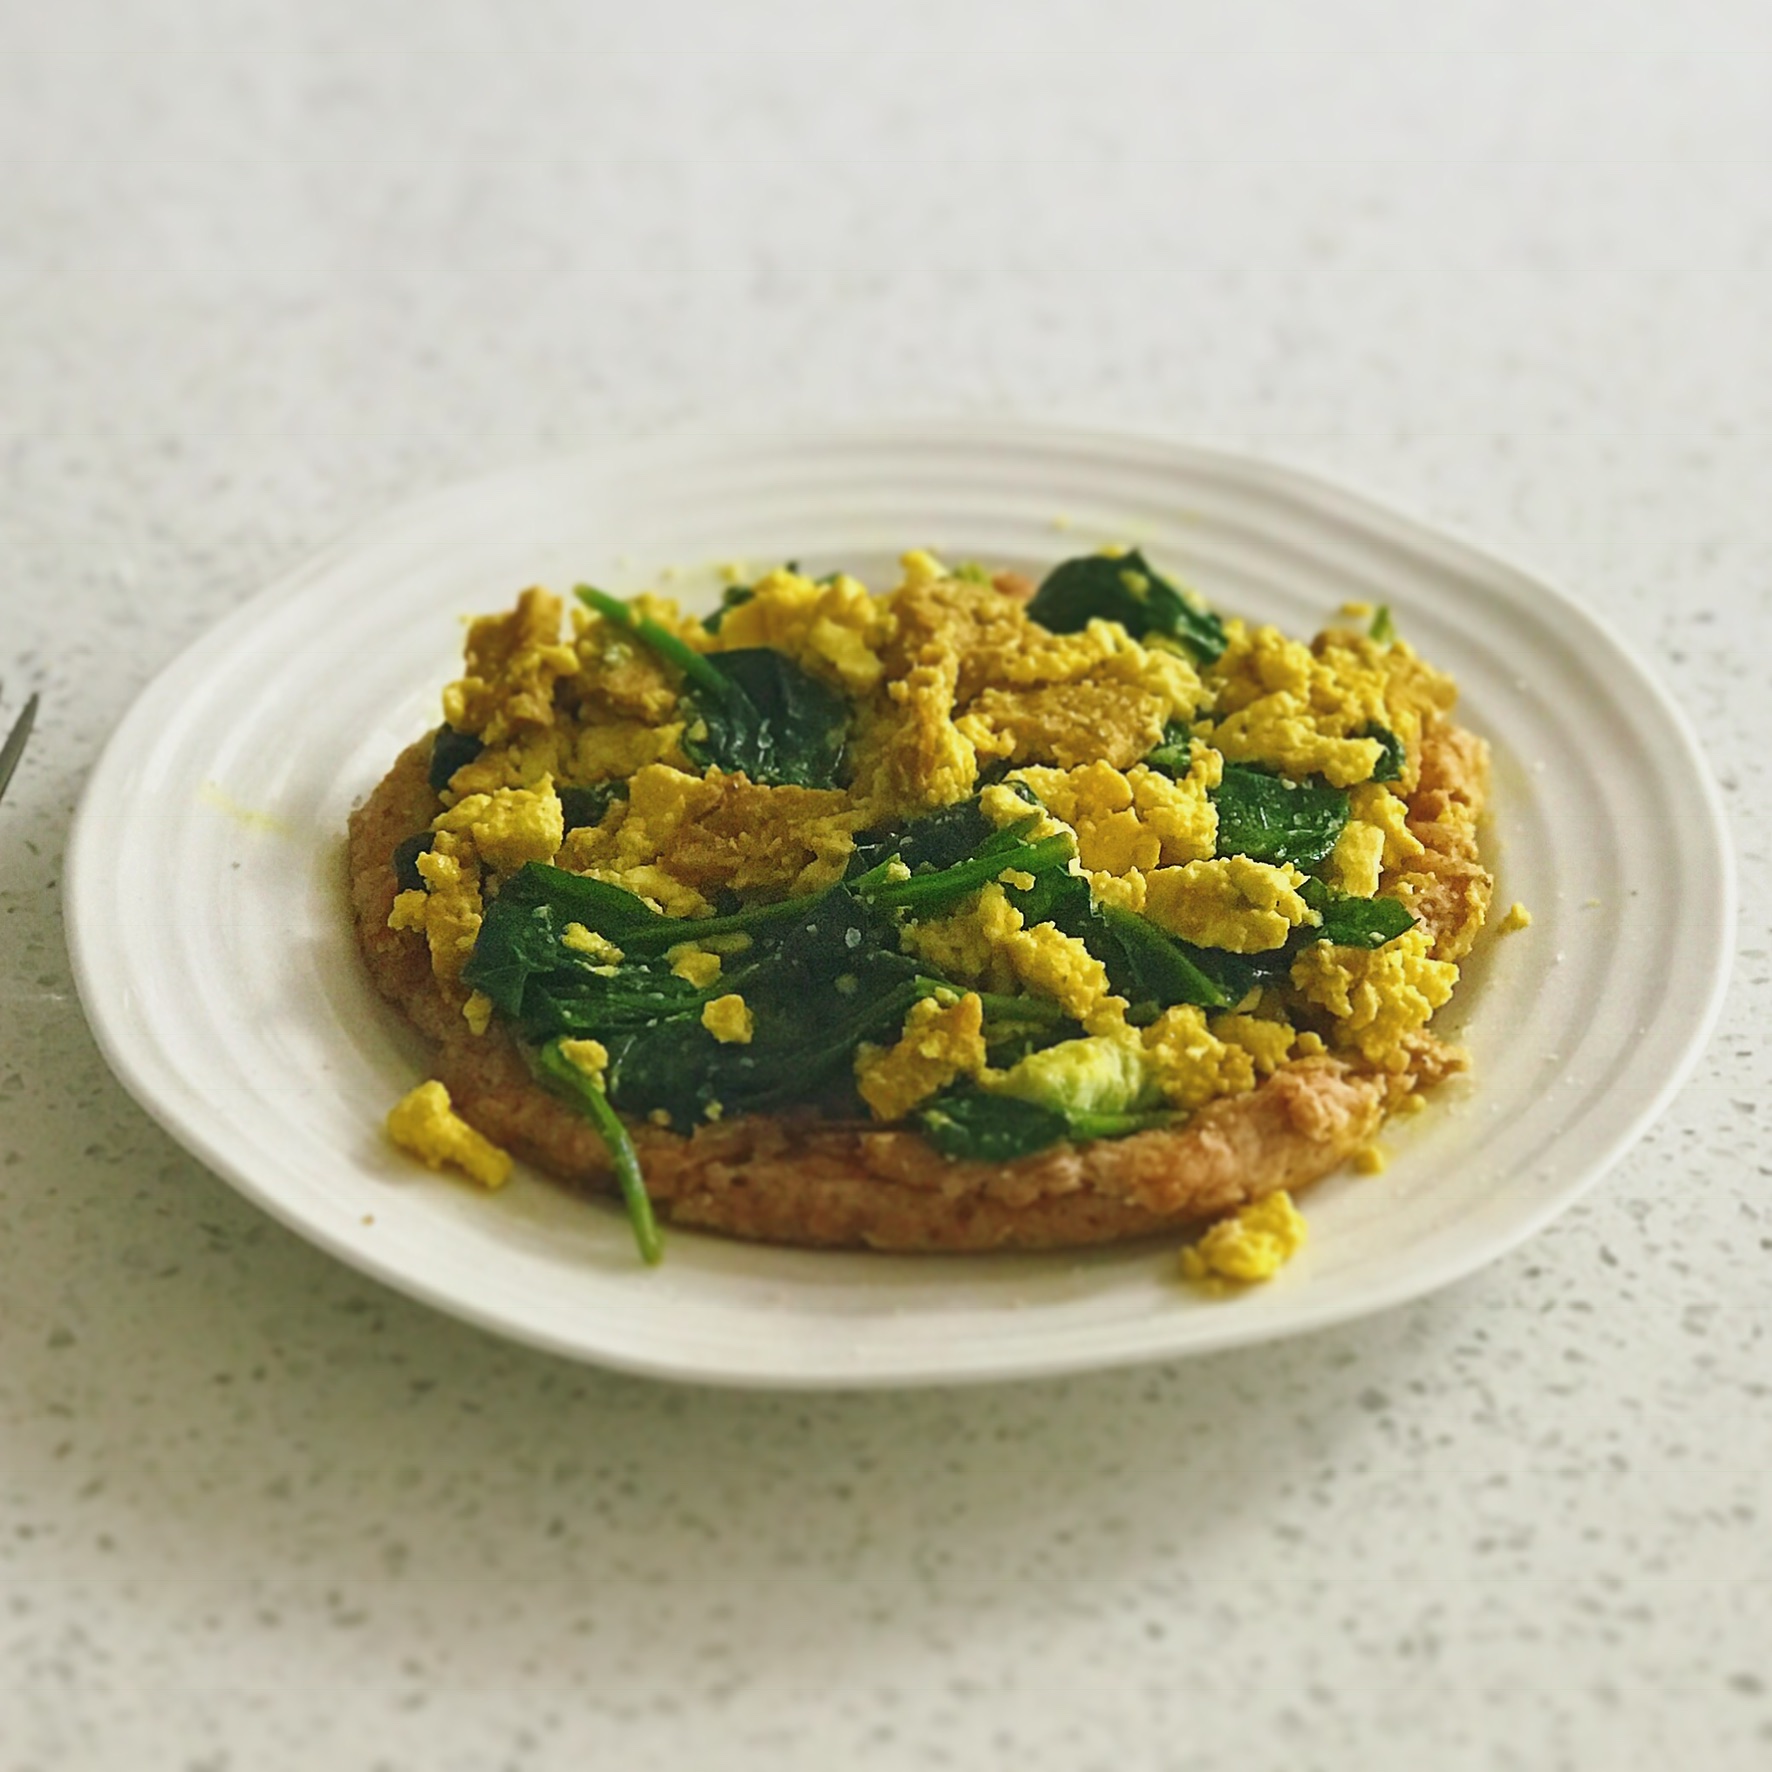 turmeric flavored tofu scramble with spinach on a white plate on white countertop.